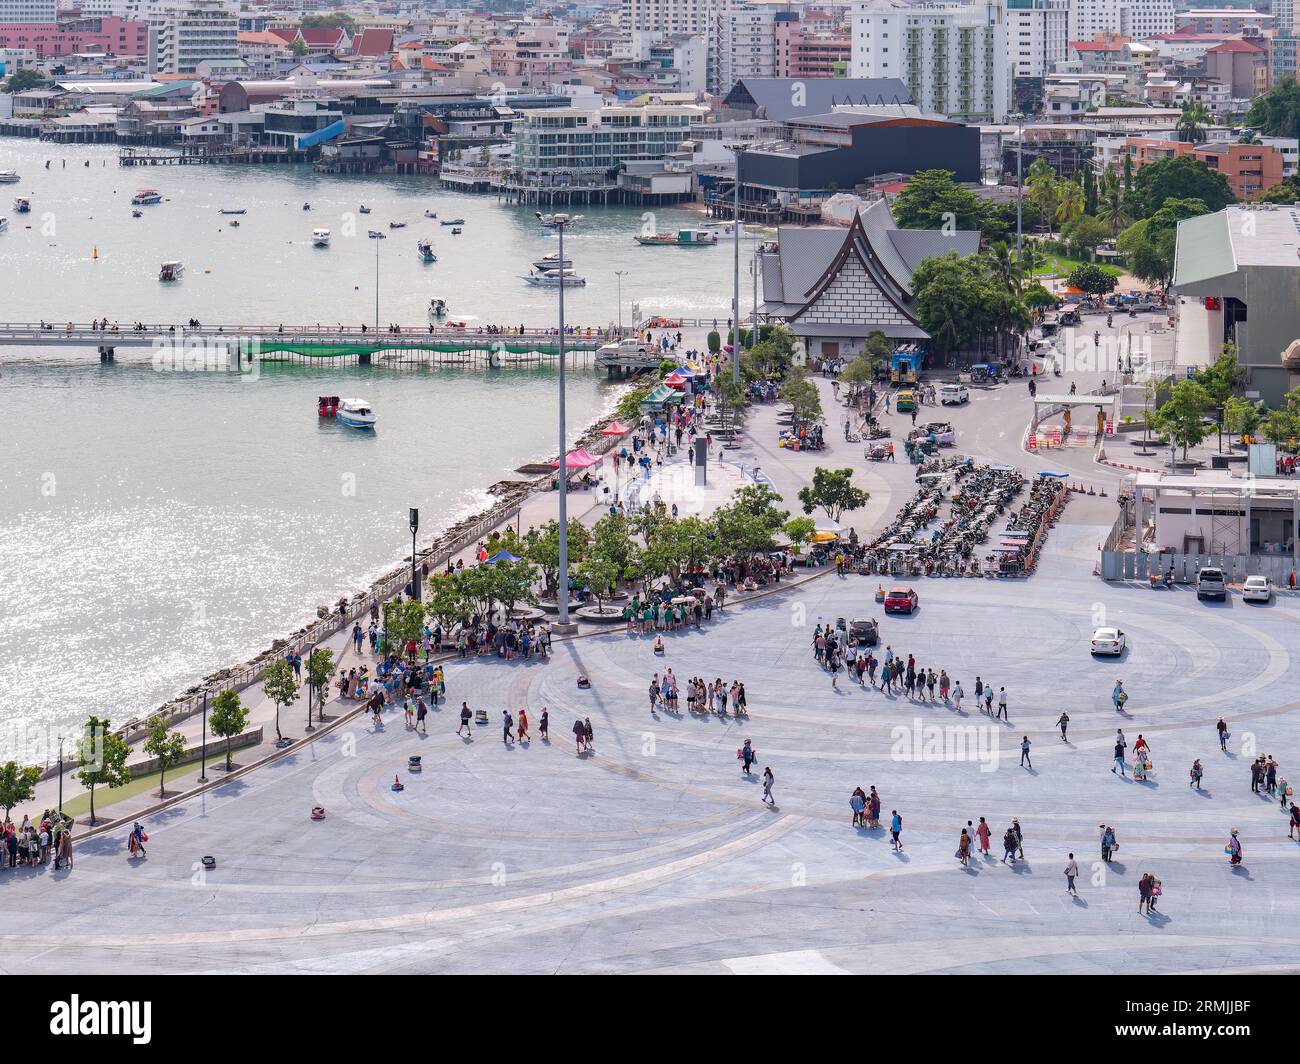 Pattaya, Thailand - August 22nd 2023: Tourists arriving at Bali Hai Pier in Pattaya to travel on boats to Koh Lan, an island off the coast of Pattaya. Stock Photo